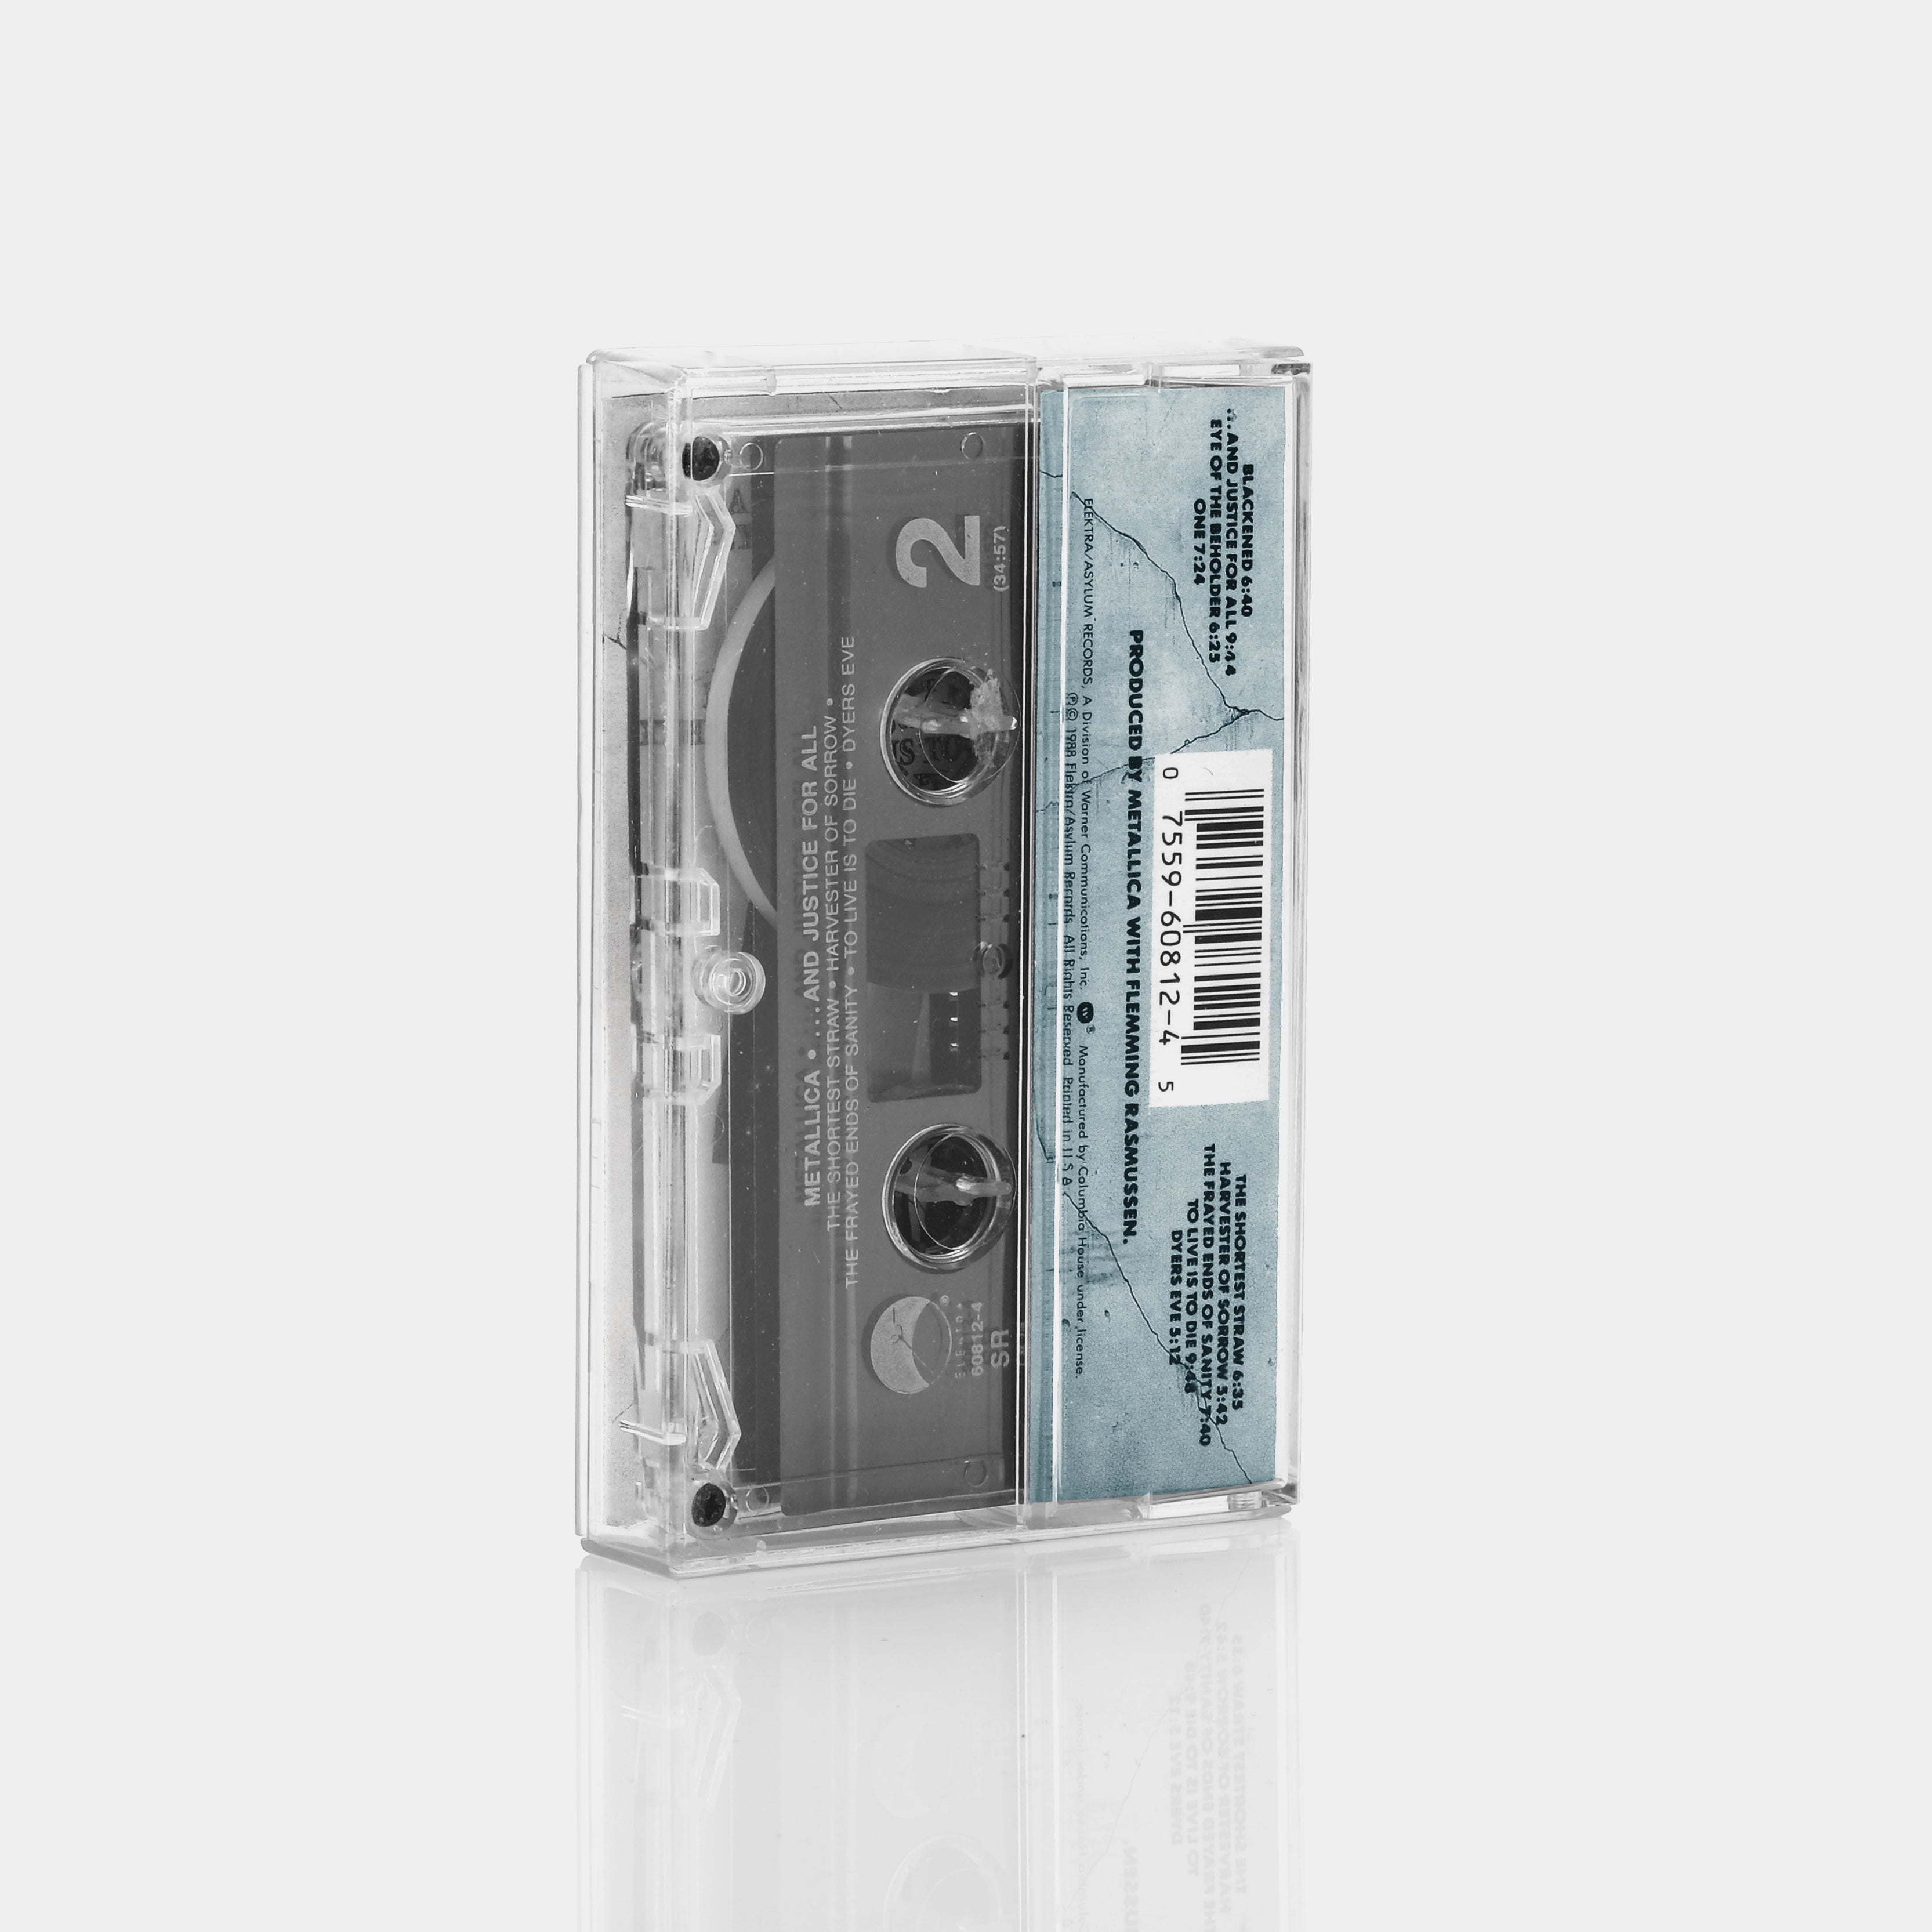 Metallica - ...And Justice For All Cassette Tape